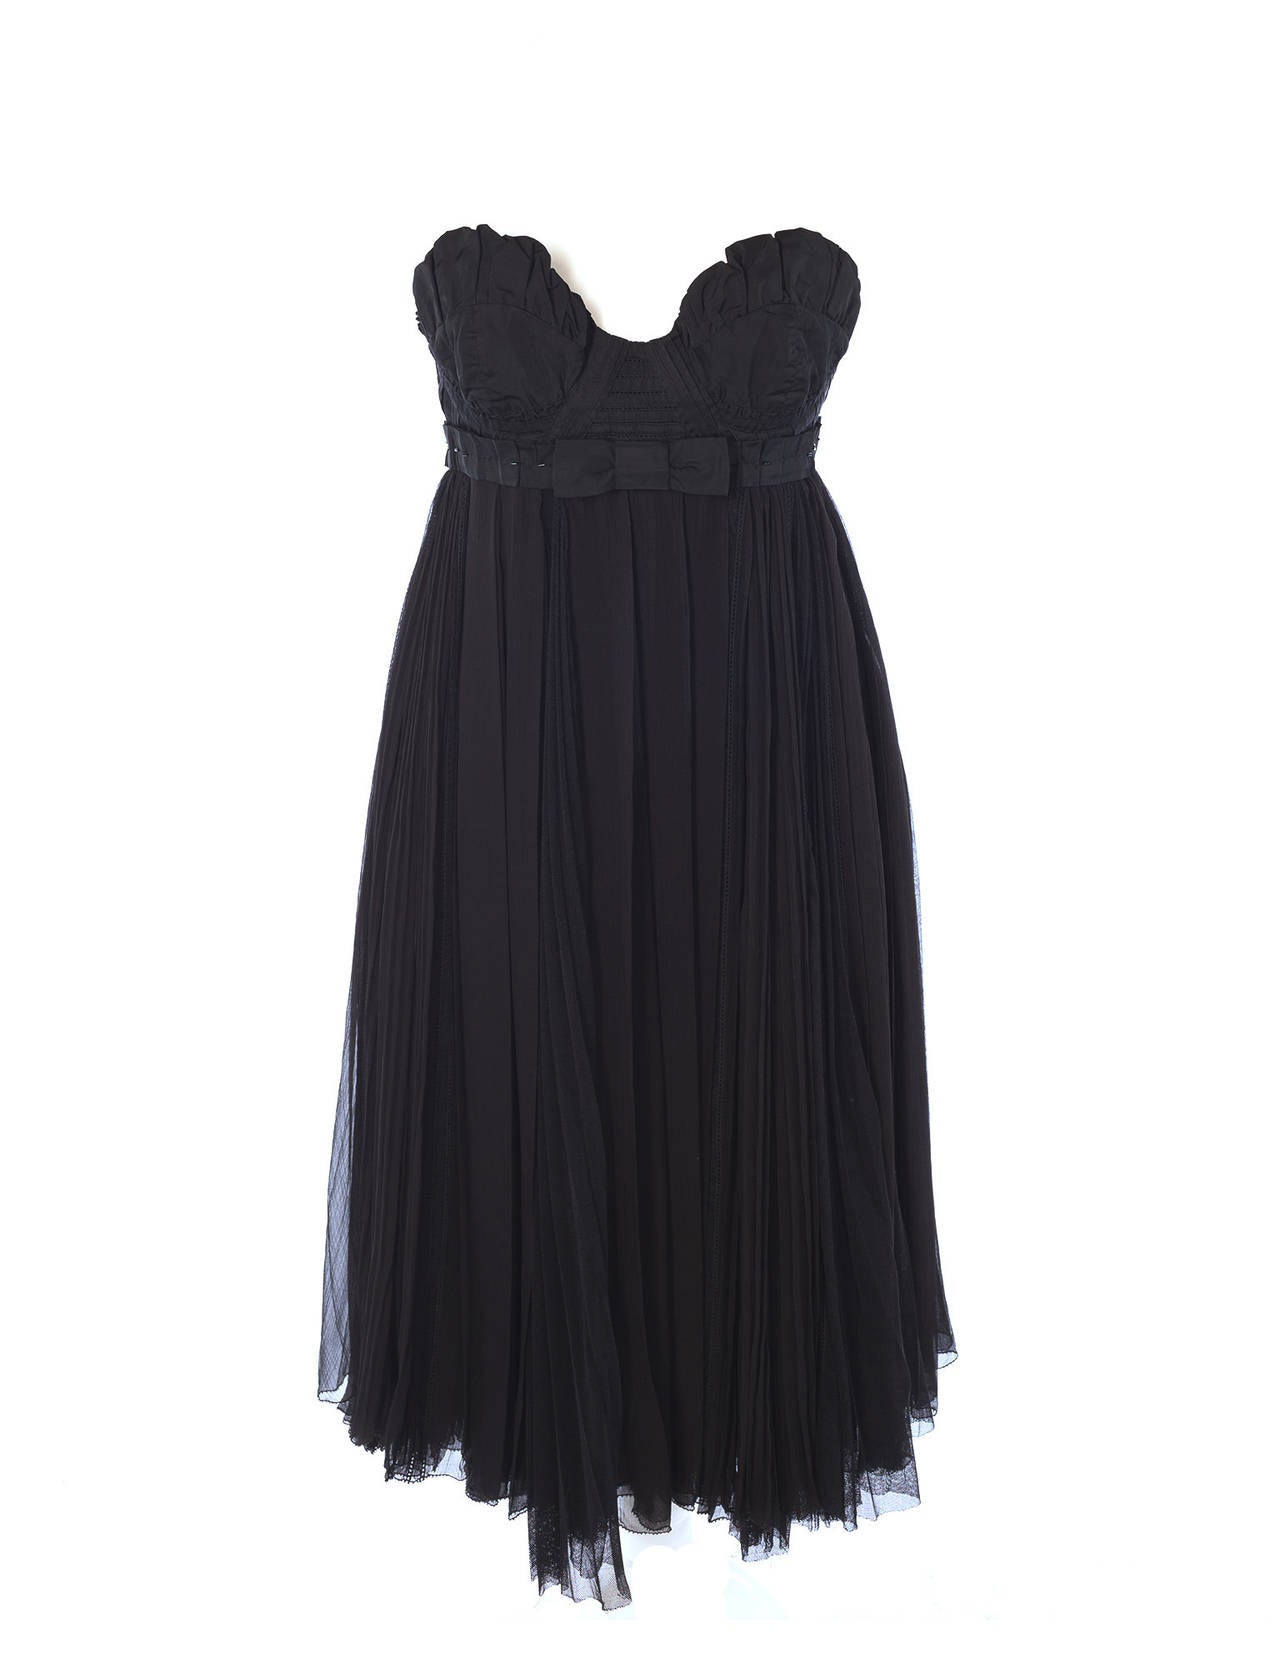 Louis Vuitton by Marc Jacobs Black Bustier dress with organza pleated skirt. Dress has several 1920's details, multi pleated skirt with lace detail inserts. bustier is strapless with black bugle bead work, black grosgrain ribbon details and is of